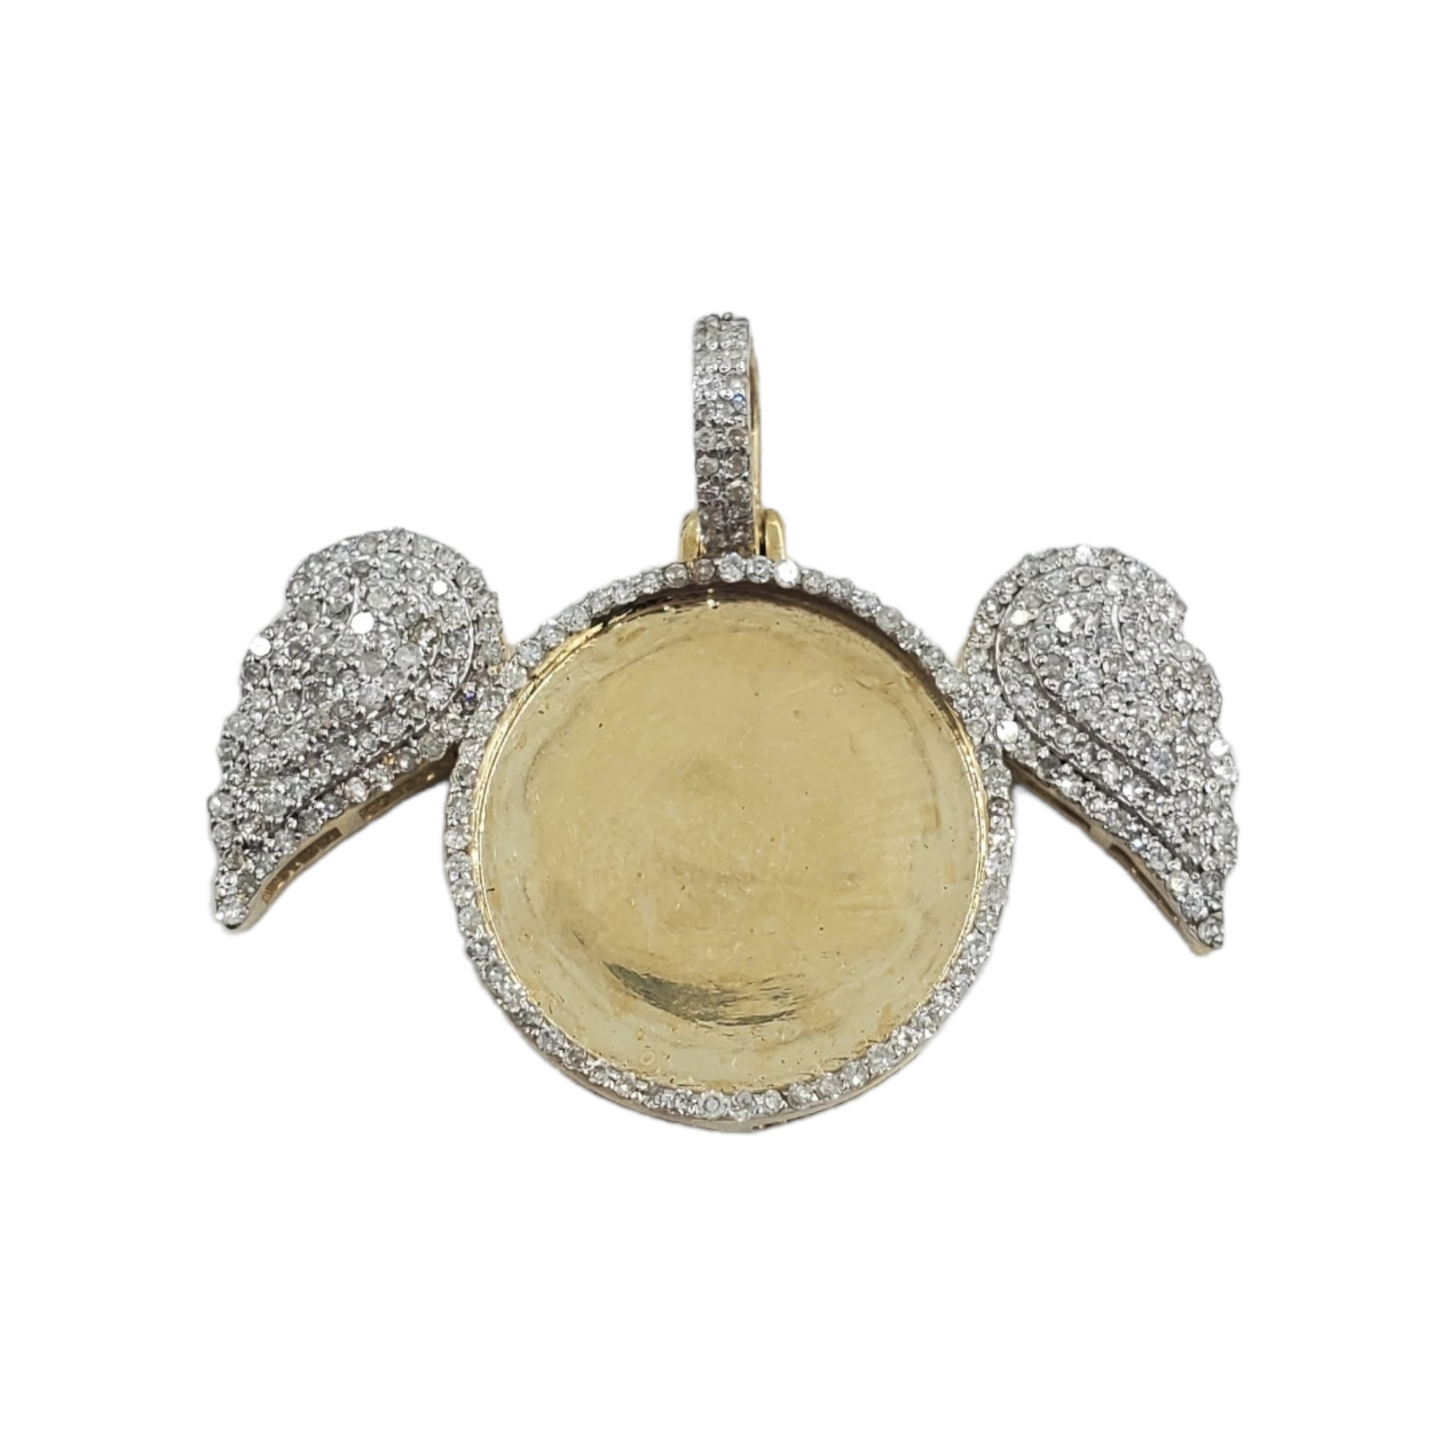 10k Gold Diamond Circle Picture Pendant with Angel Wings #19455